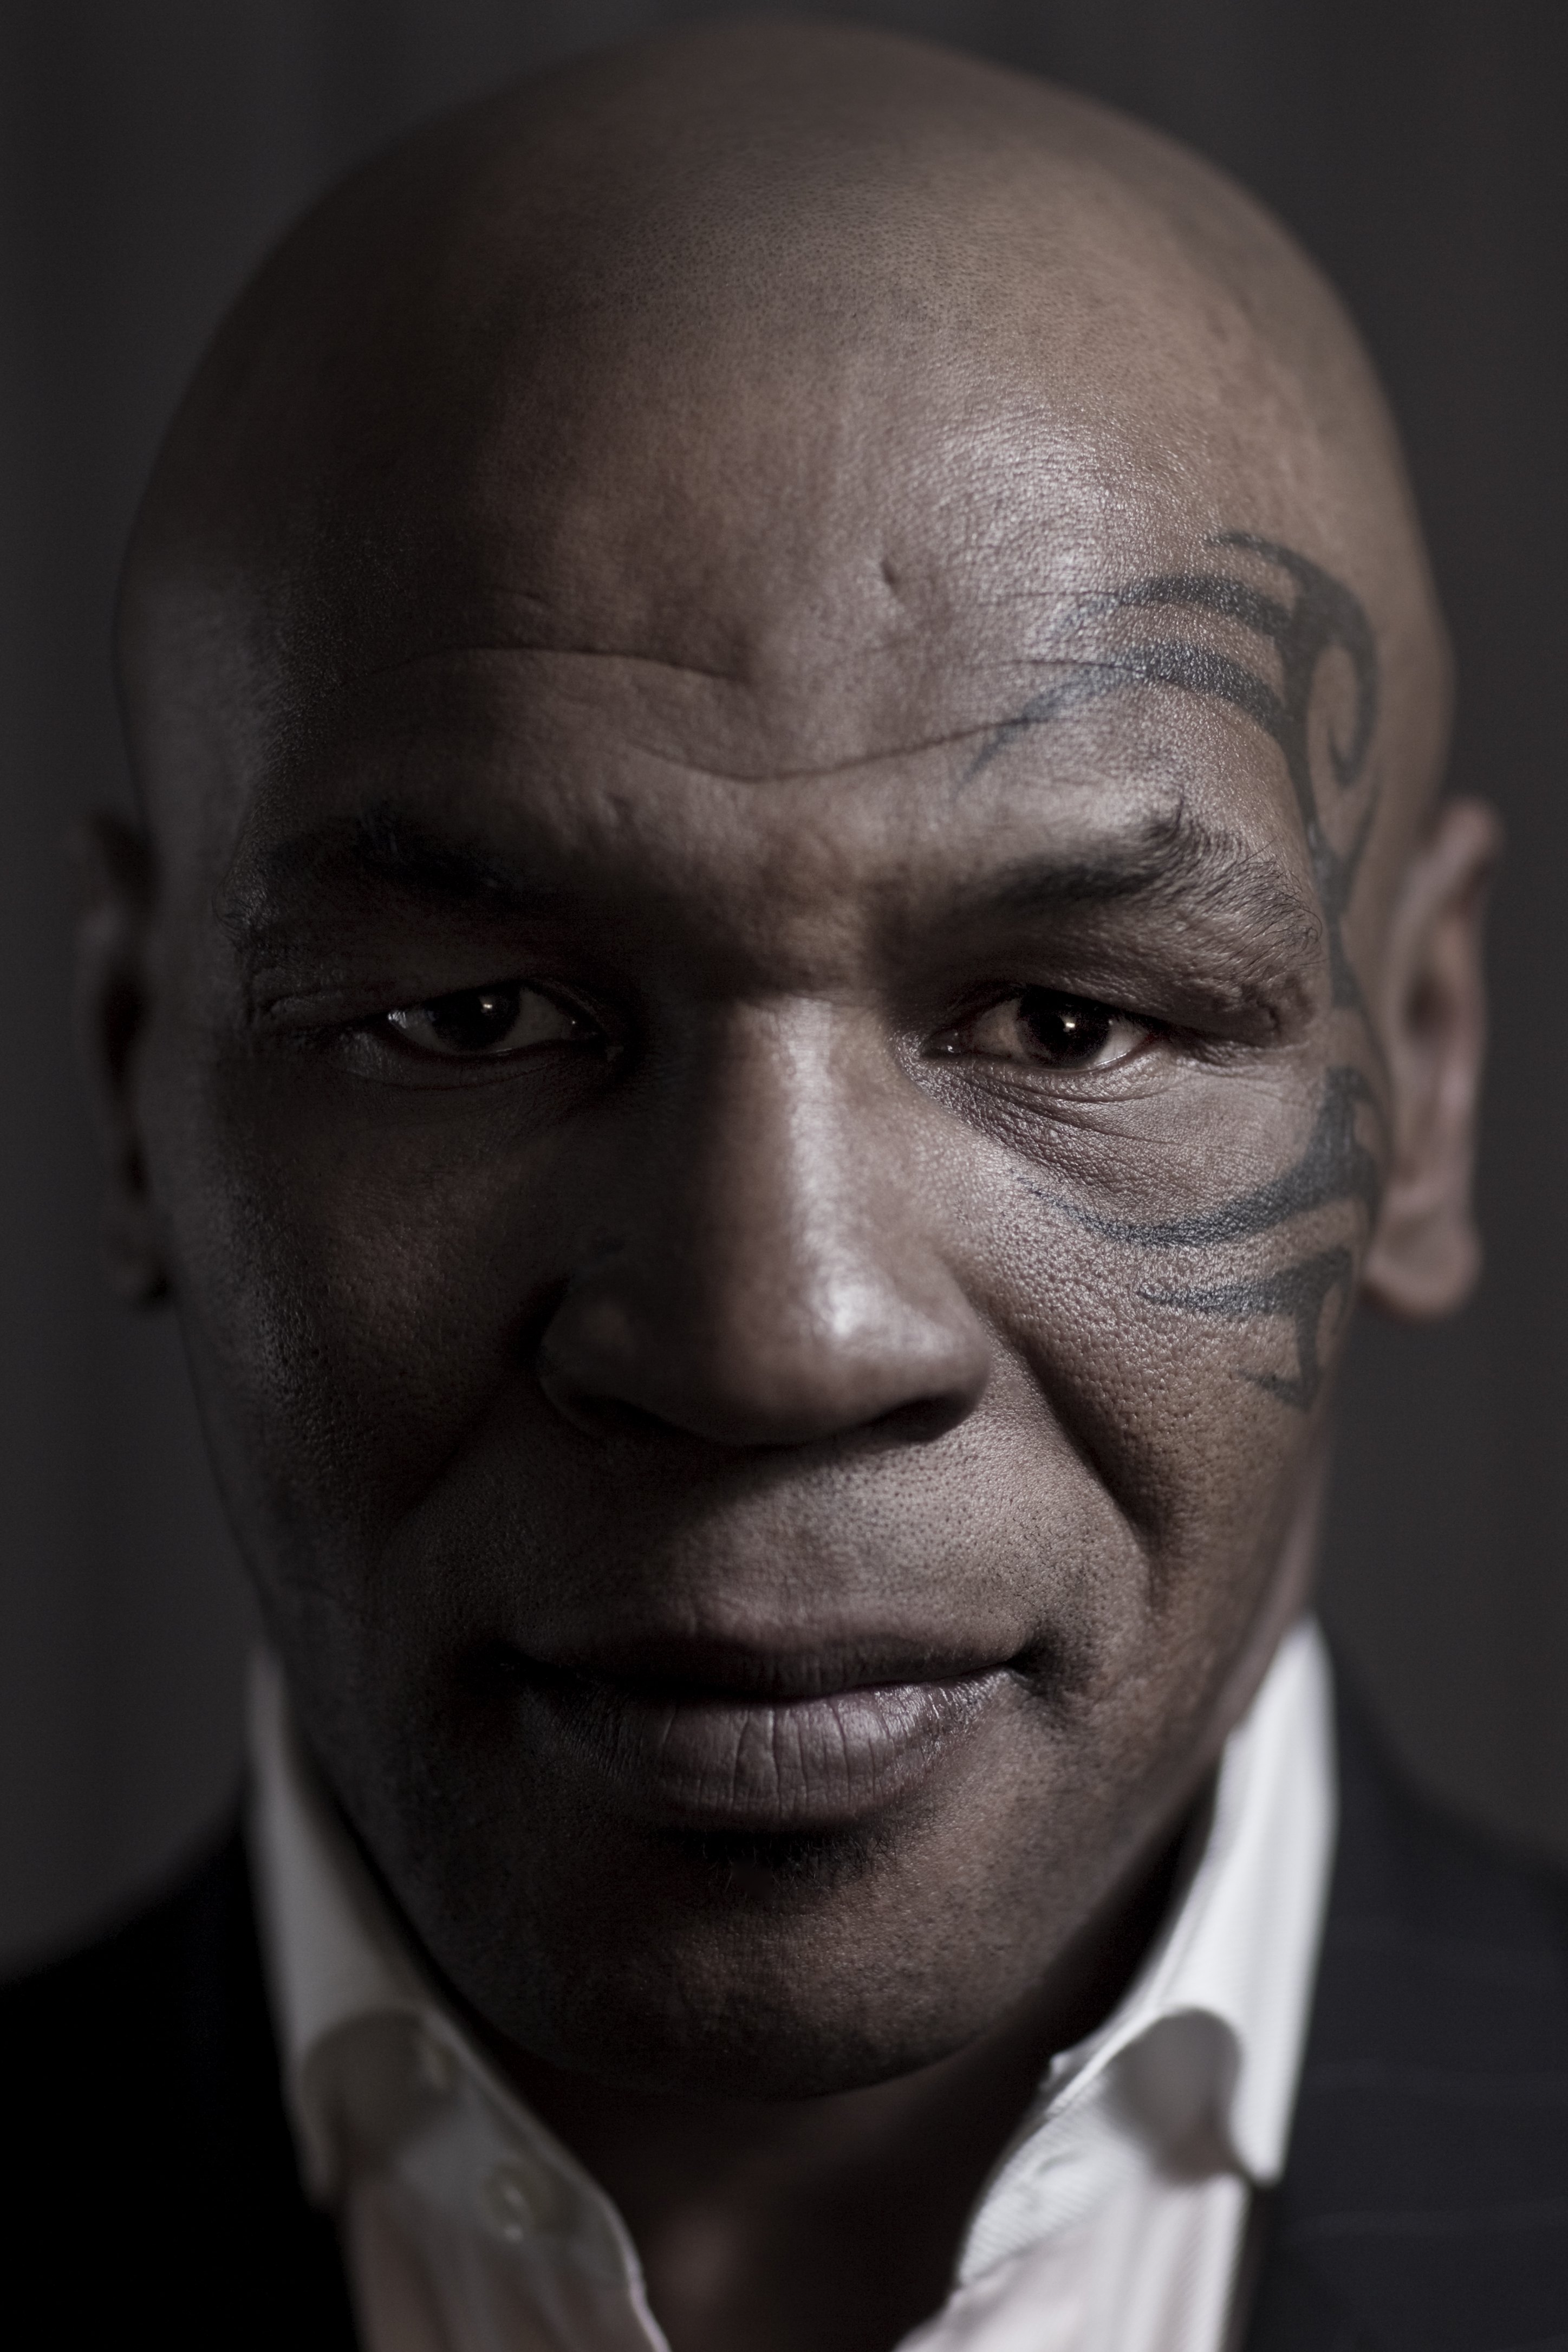 NEW YORK - APRIL 14:  Retired boxer Mike Tyson is photographed at his hotel on April 14, 2010 in New York, New York.  (Photo by Chris McGrath/Getty Images)